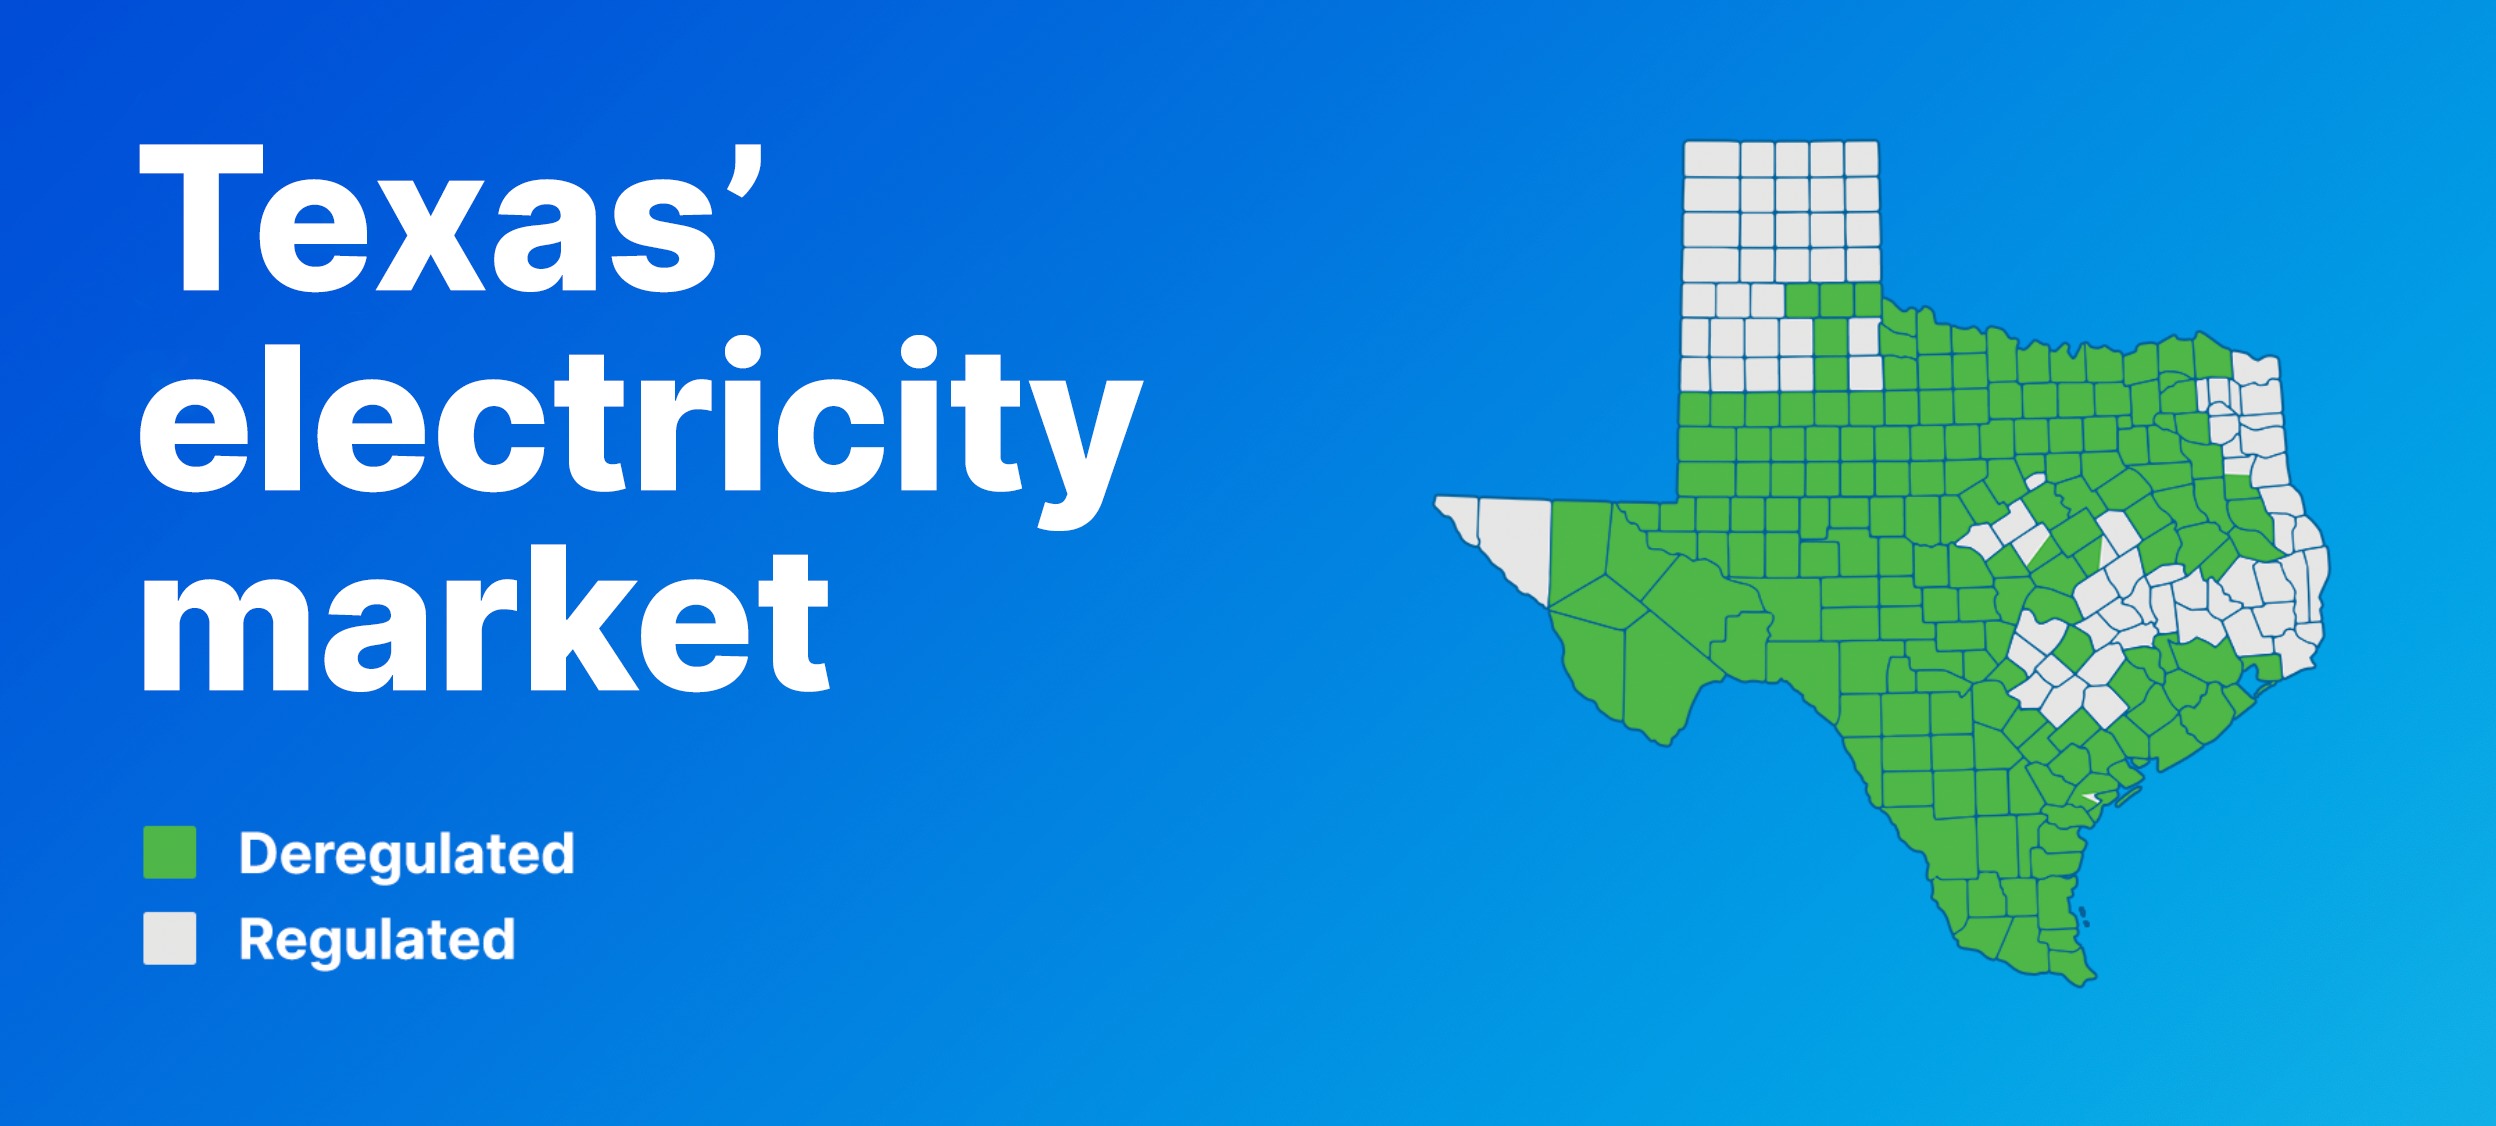 Map showing the deregulated and regulated electricity markets in Texas.